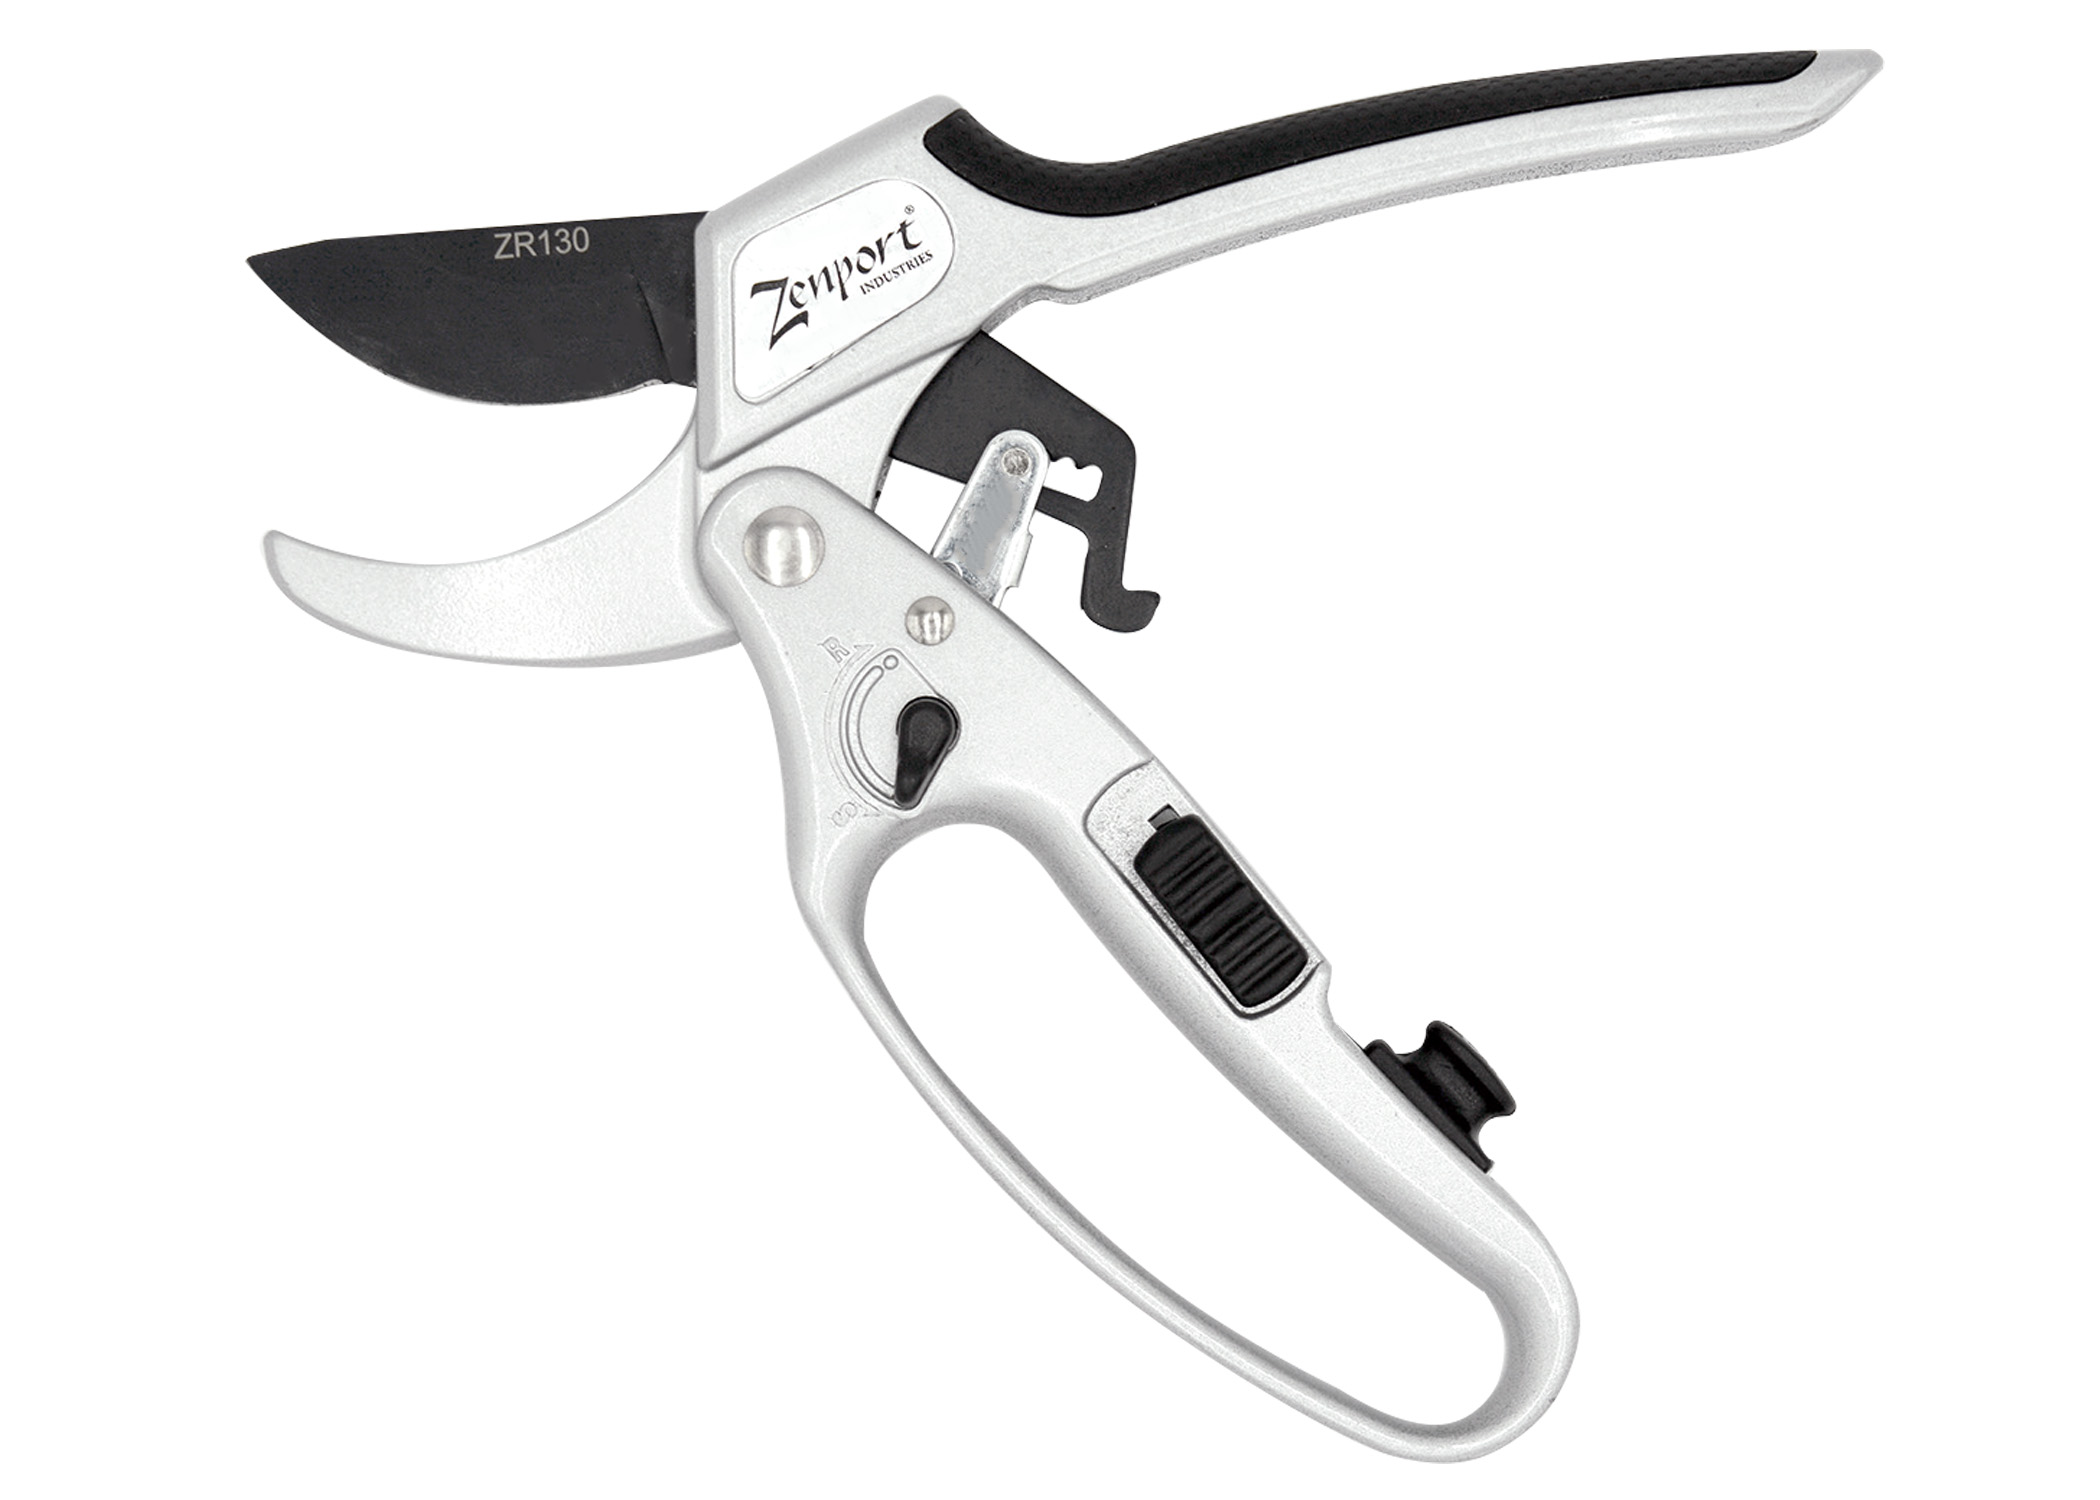 Zenport Pruner ZR130 BOX OF 10, Ratchet Deluxe, Easy Cutting Action, Curved Blade, 1-Inch Cut, 8.5-Inch Long